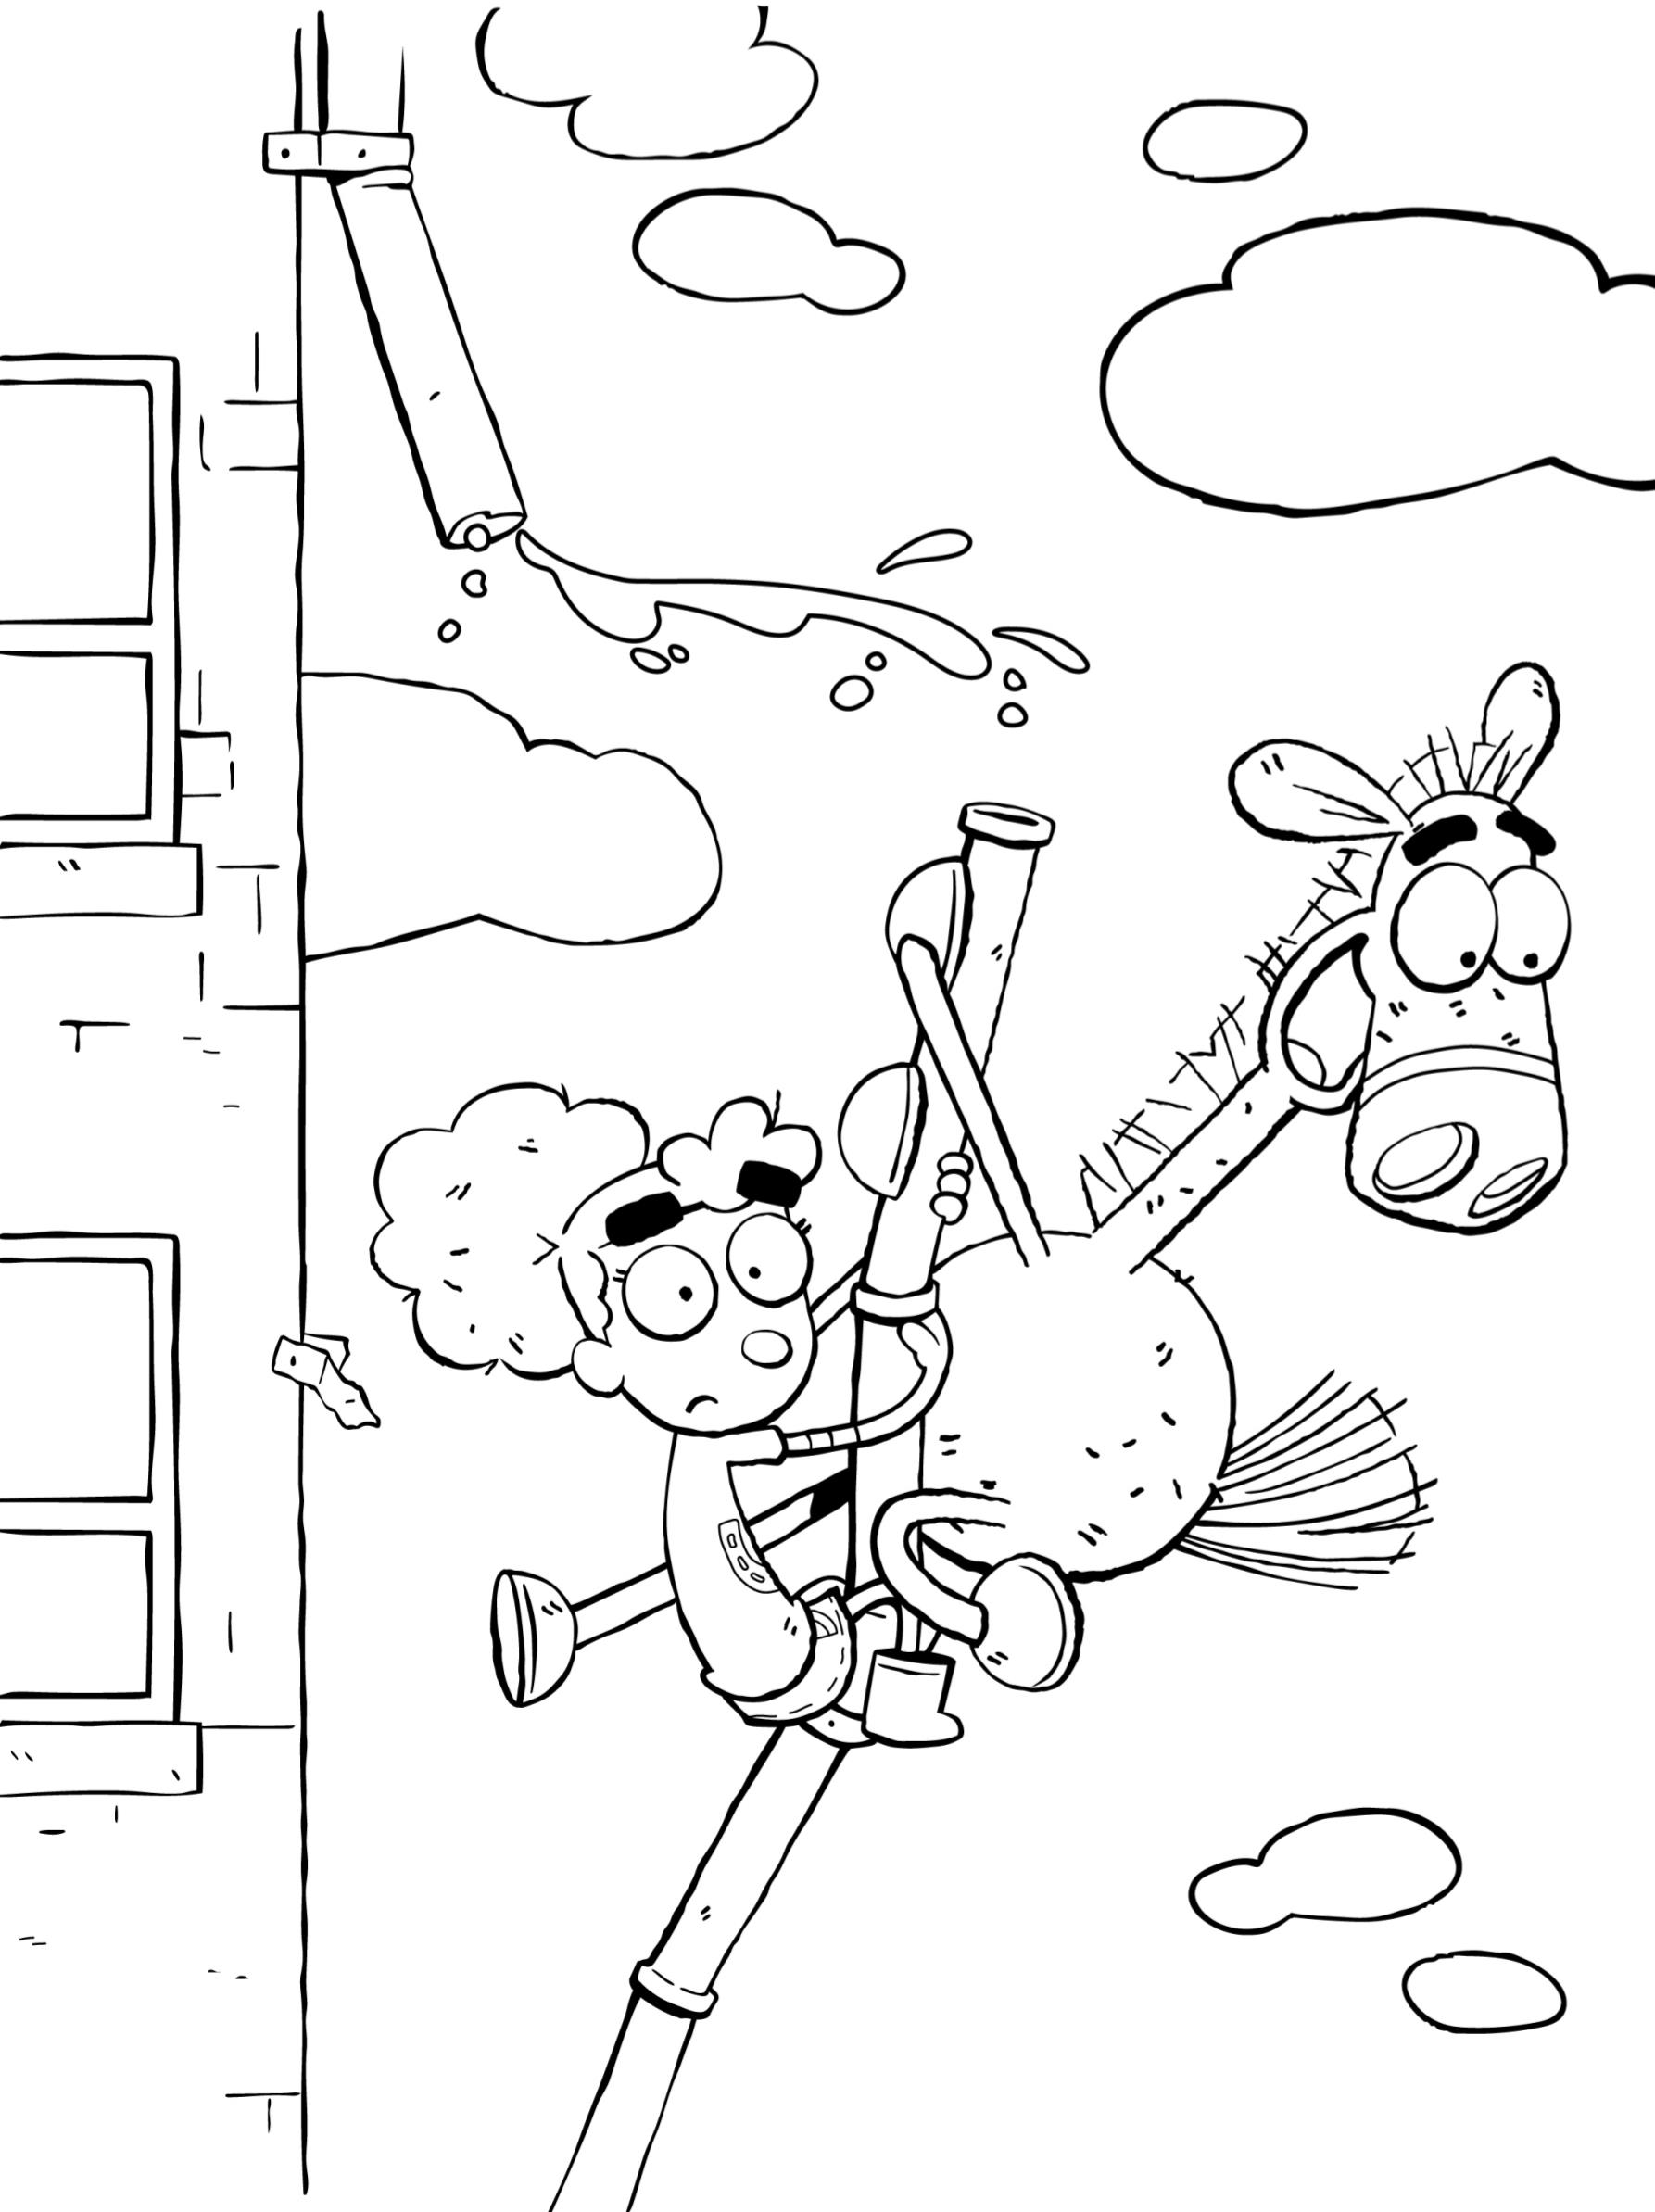 Kids-n-fun.com | Create personal coloring page of It's Pony coloring page